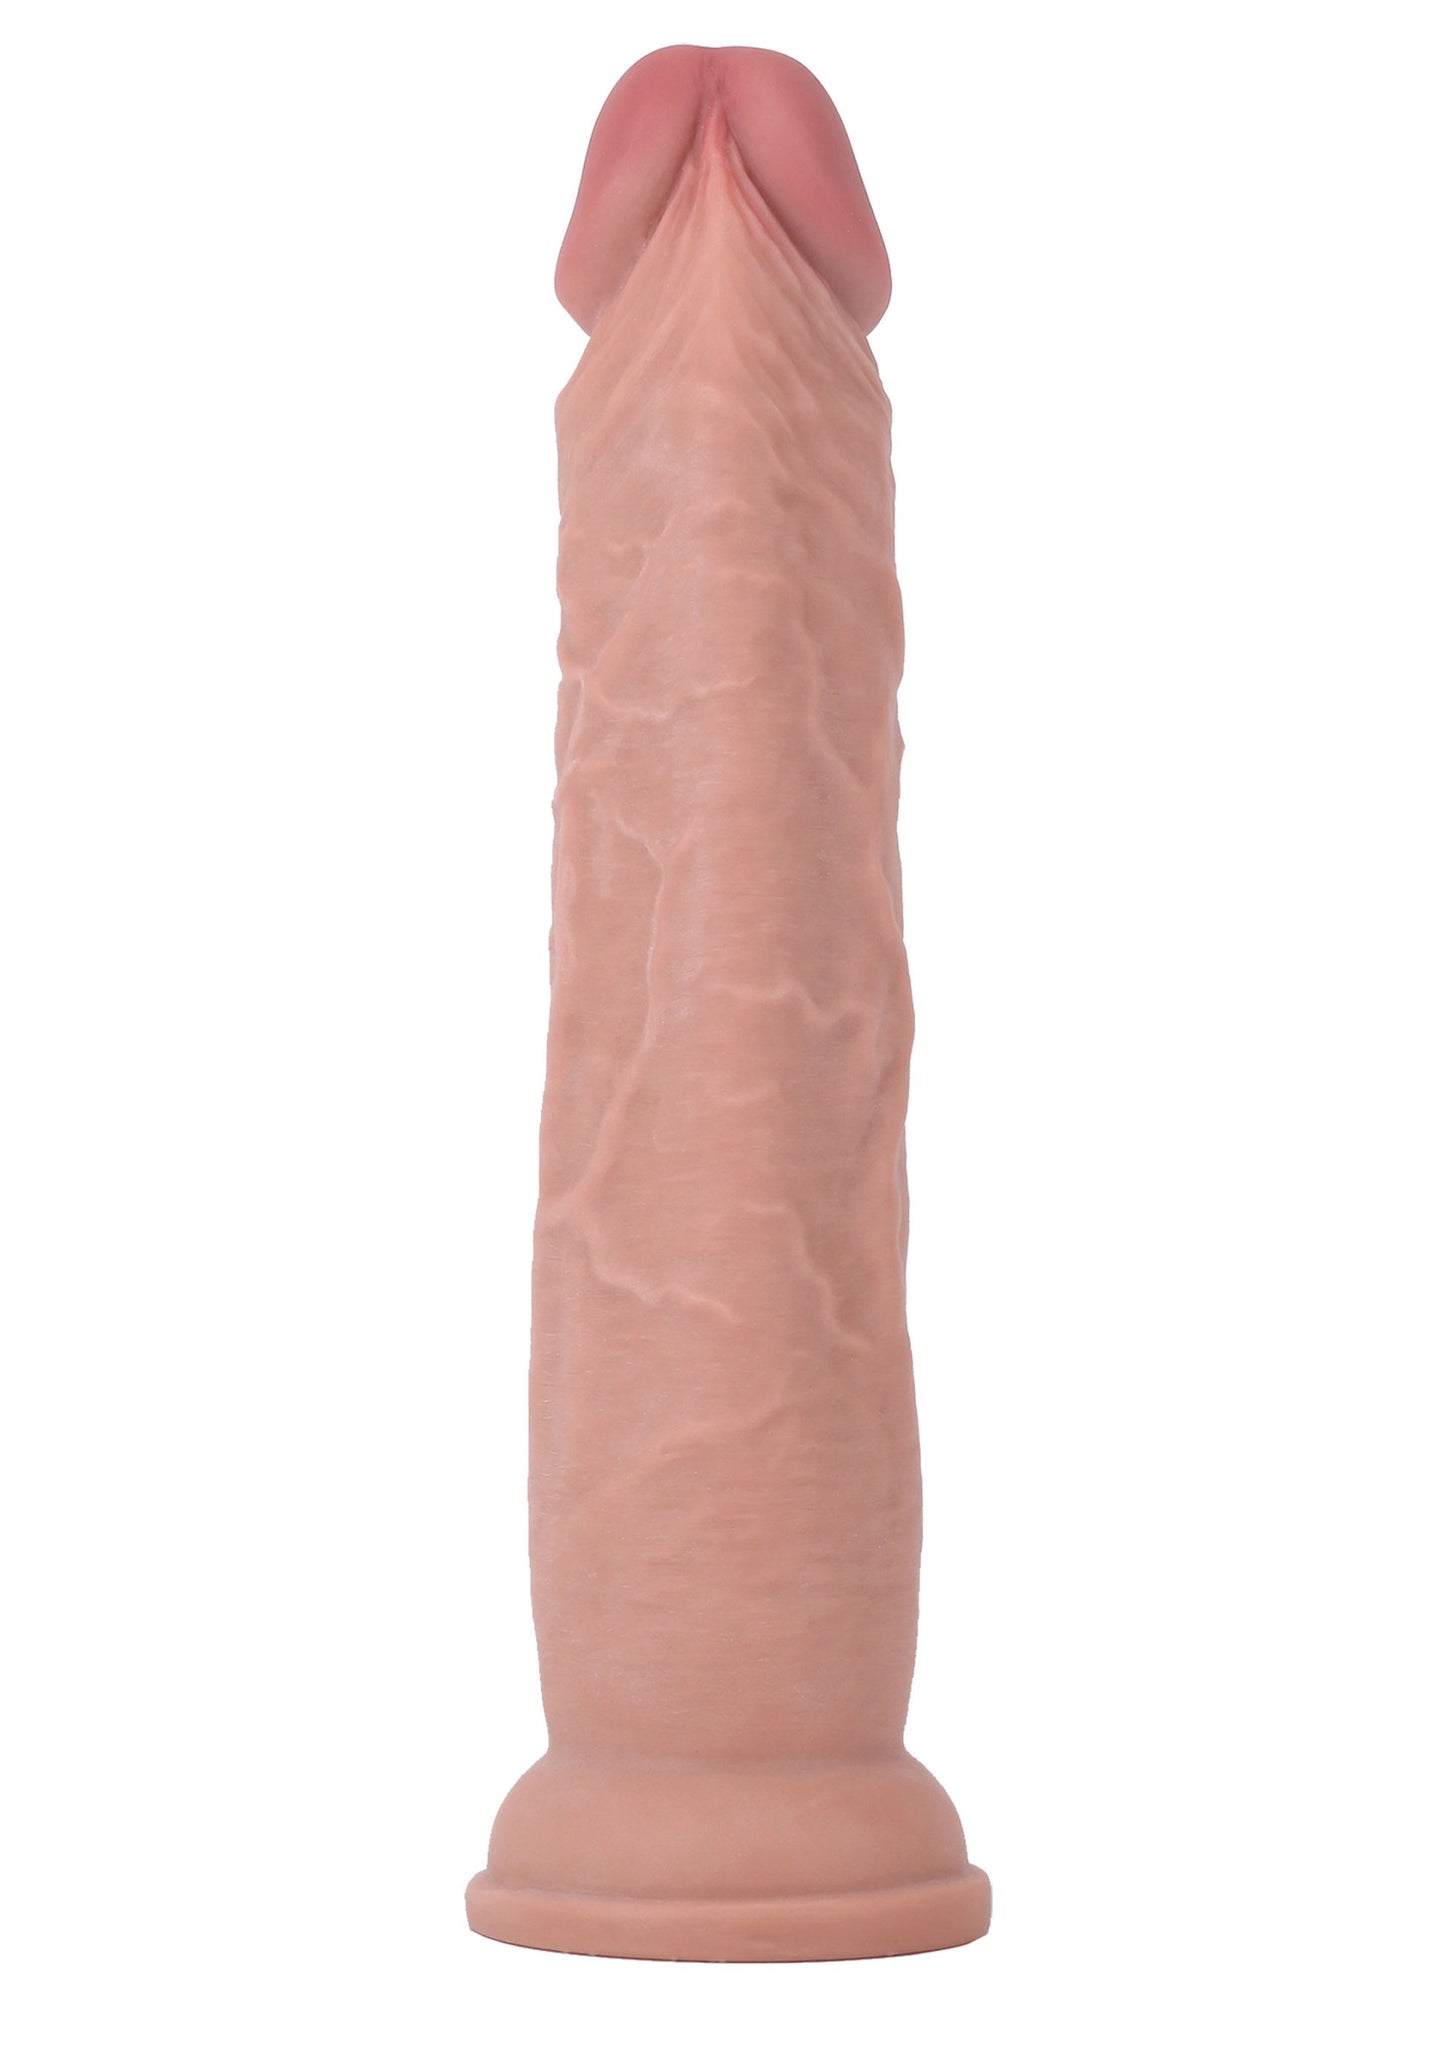 ToyJoy Get Real Deluxe Dual Density Dong 14' SKIN - 2